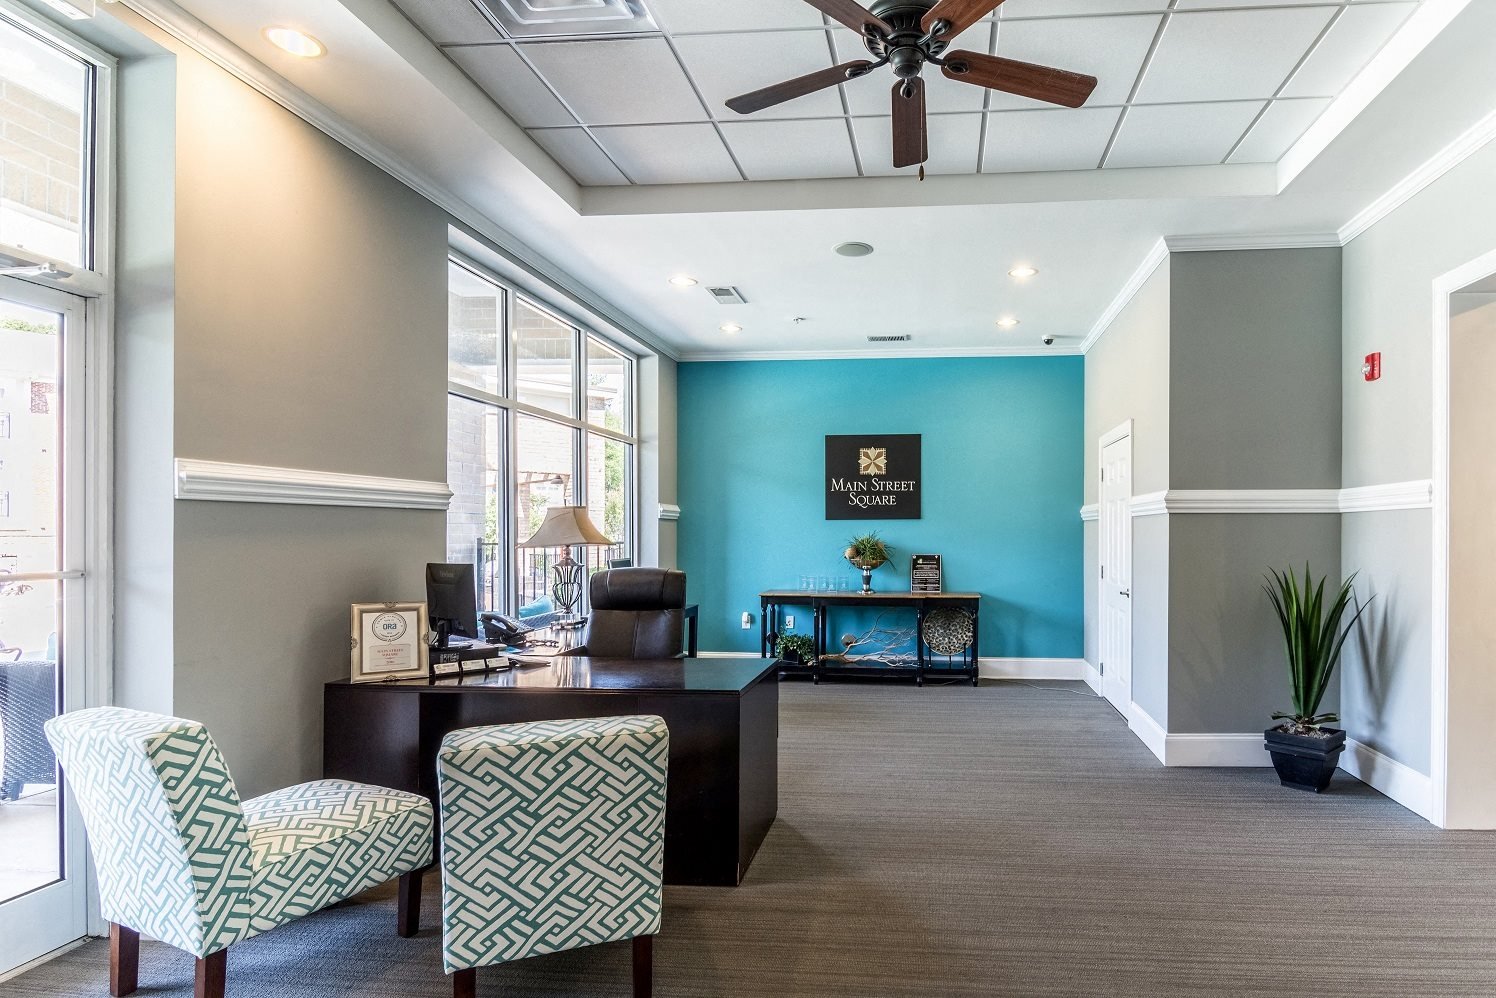 Leasing Office at Main Street Square, Holly Springs, 27540